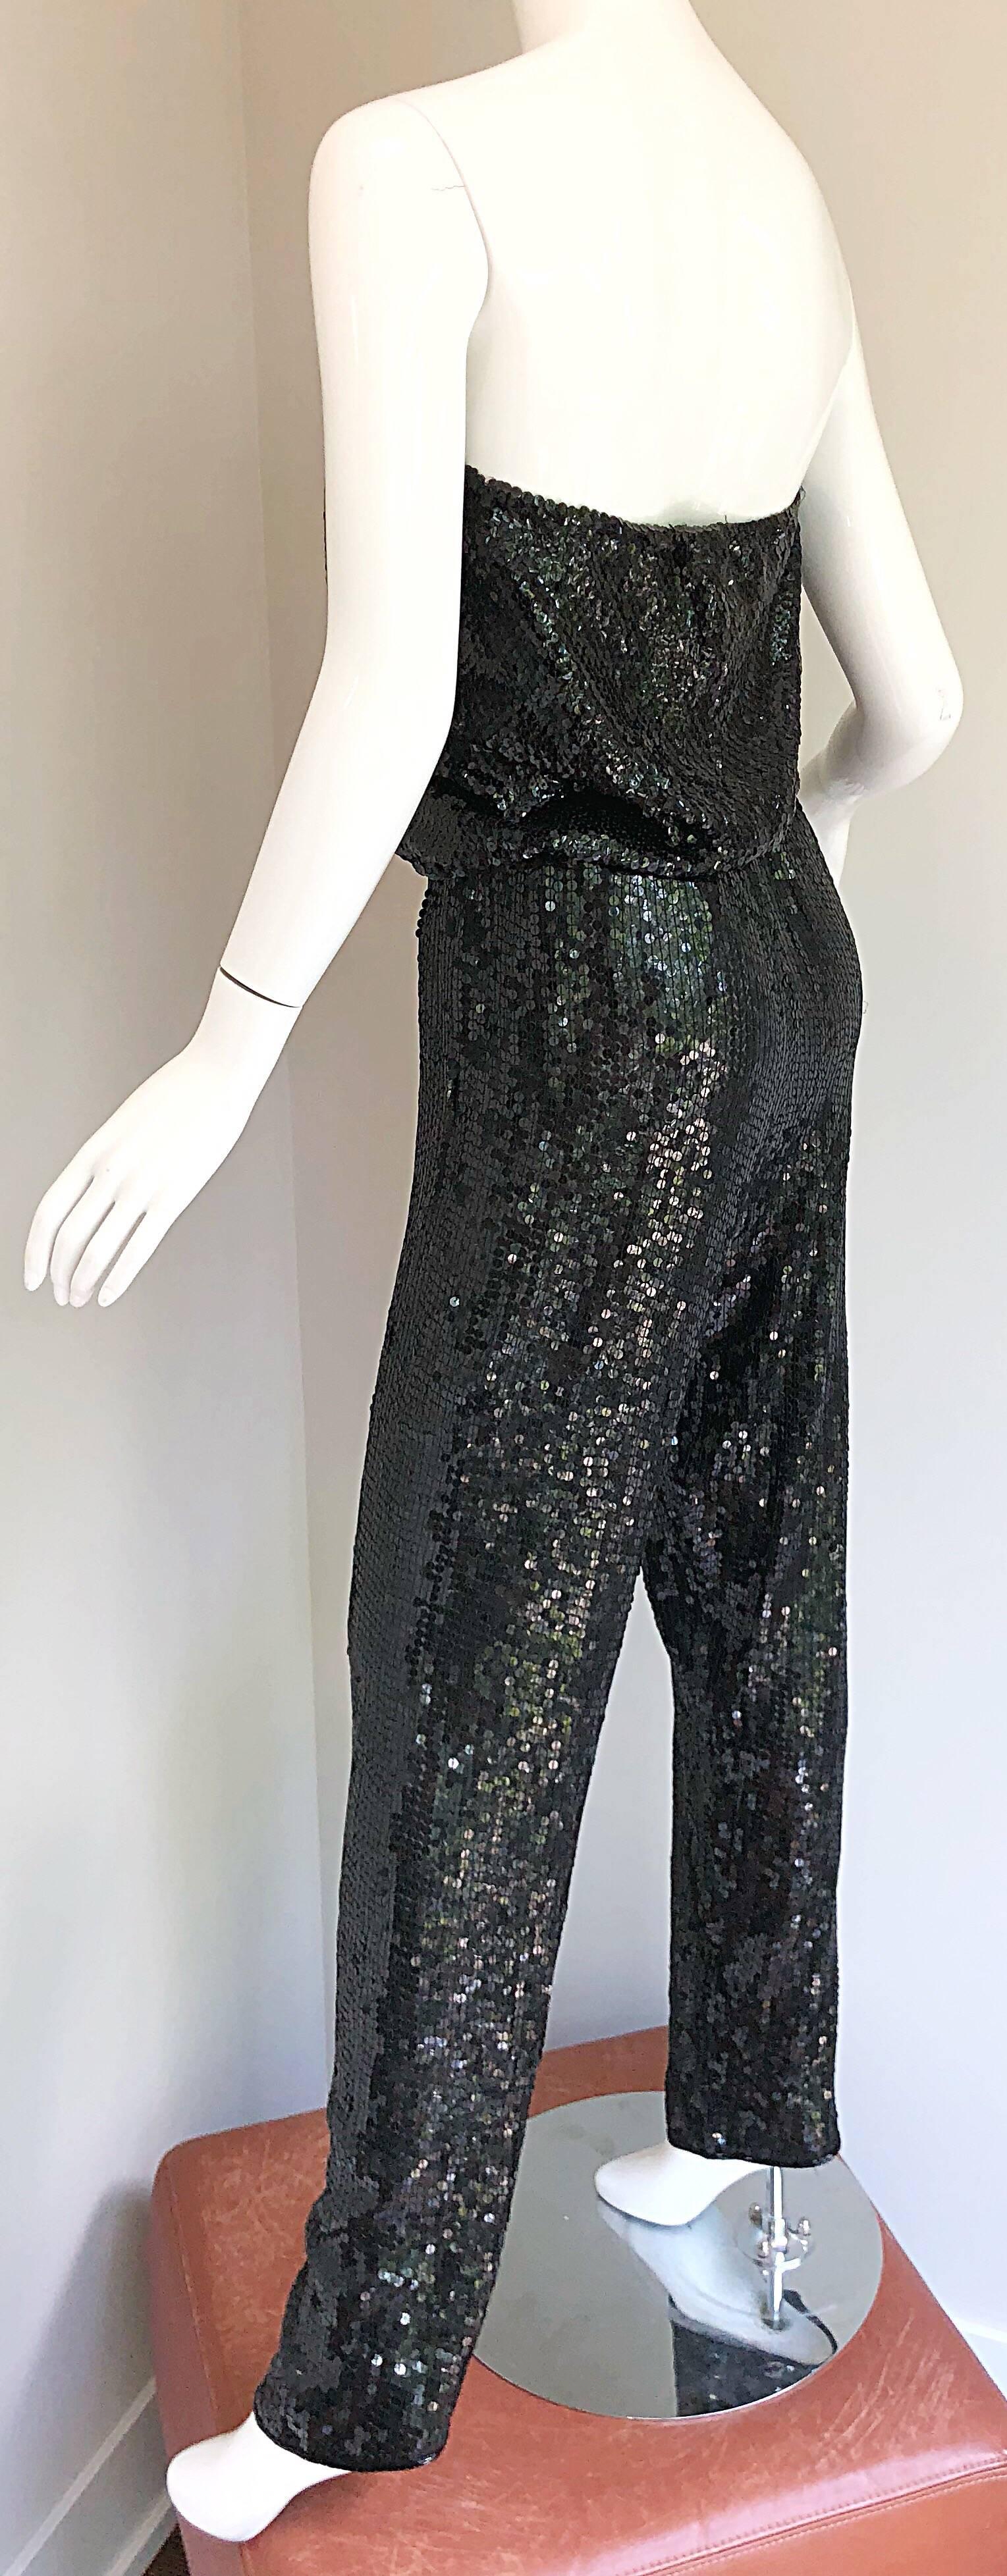 1970s Halston Black Silk Chiffon Fully Sequined 70s Strapless Tube Top + Pants For Sale 2